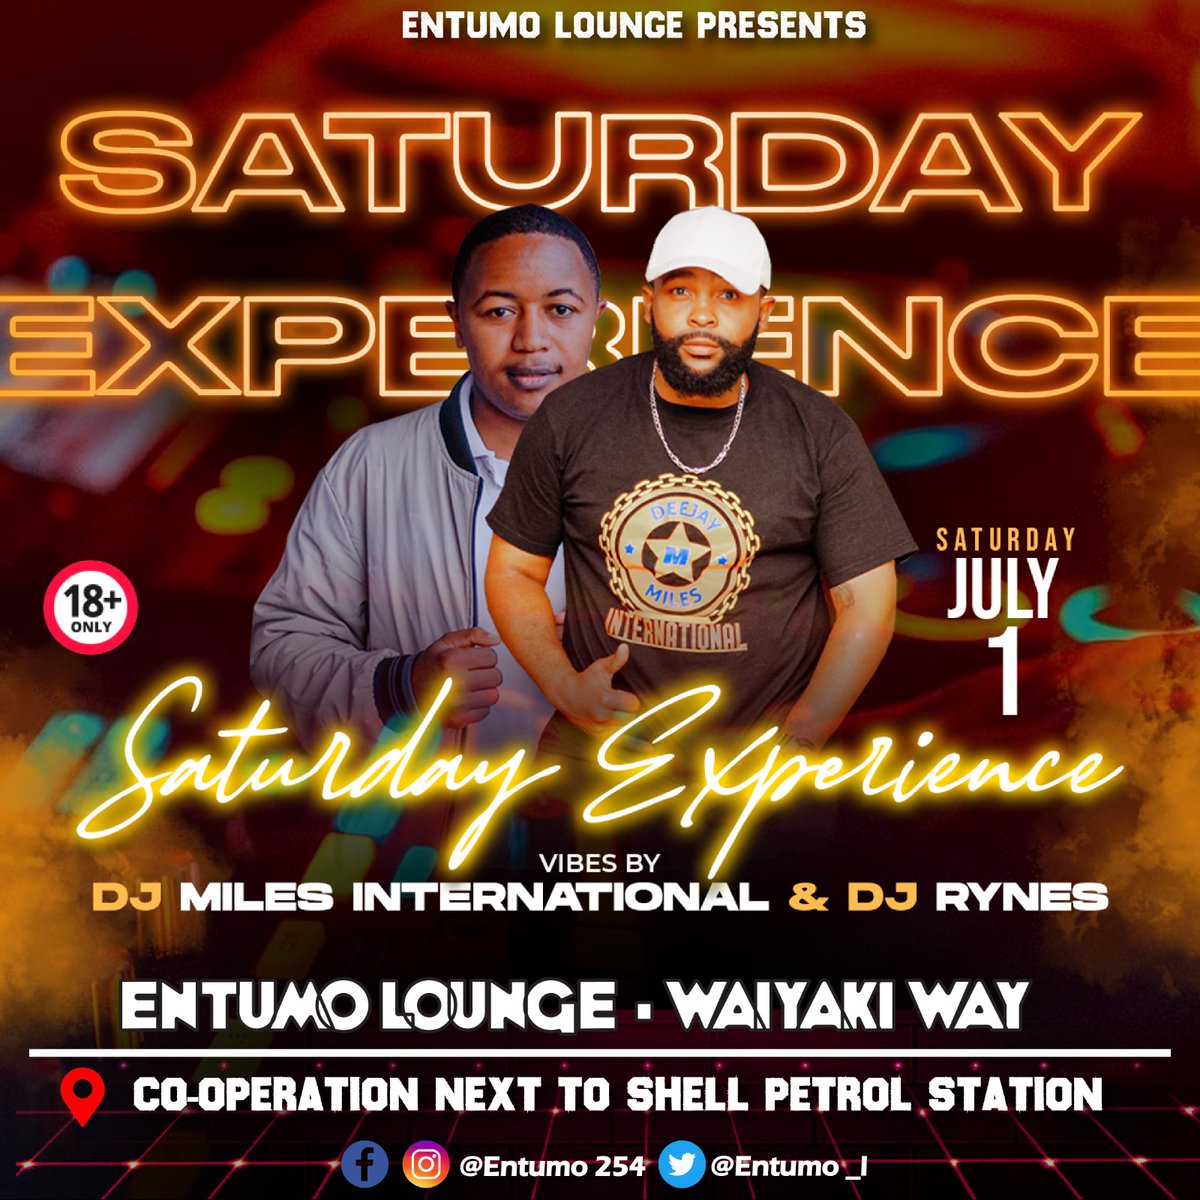 💥You can never go wrong with Saturday Experience Nights🔥 💥Make the most of it by having a good time while partying🥳 Entumo Lounge ⏩Another Place..........Another World⏪ #entumo254 #entumolounge #waiyakiwaysfinest #saturdayexperienceparty